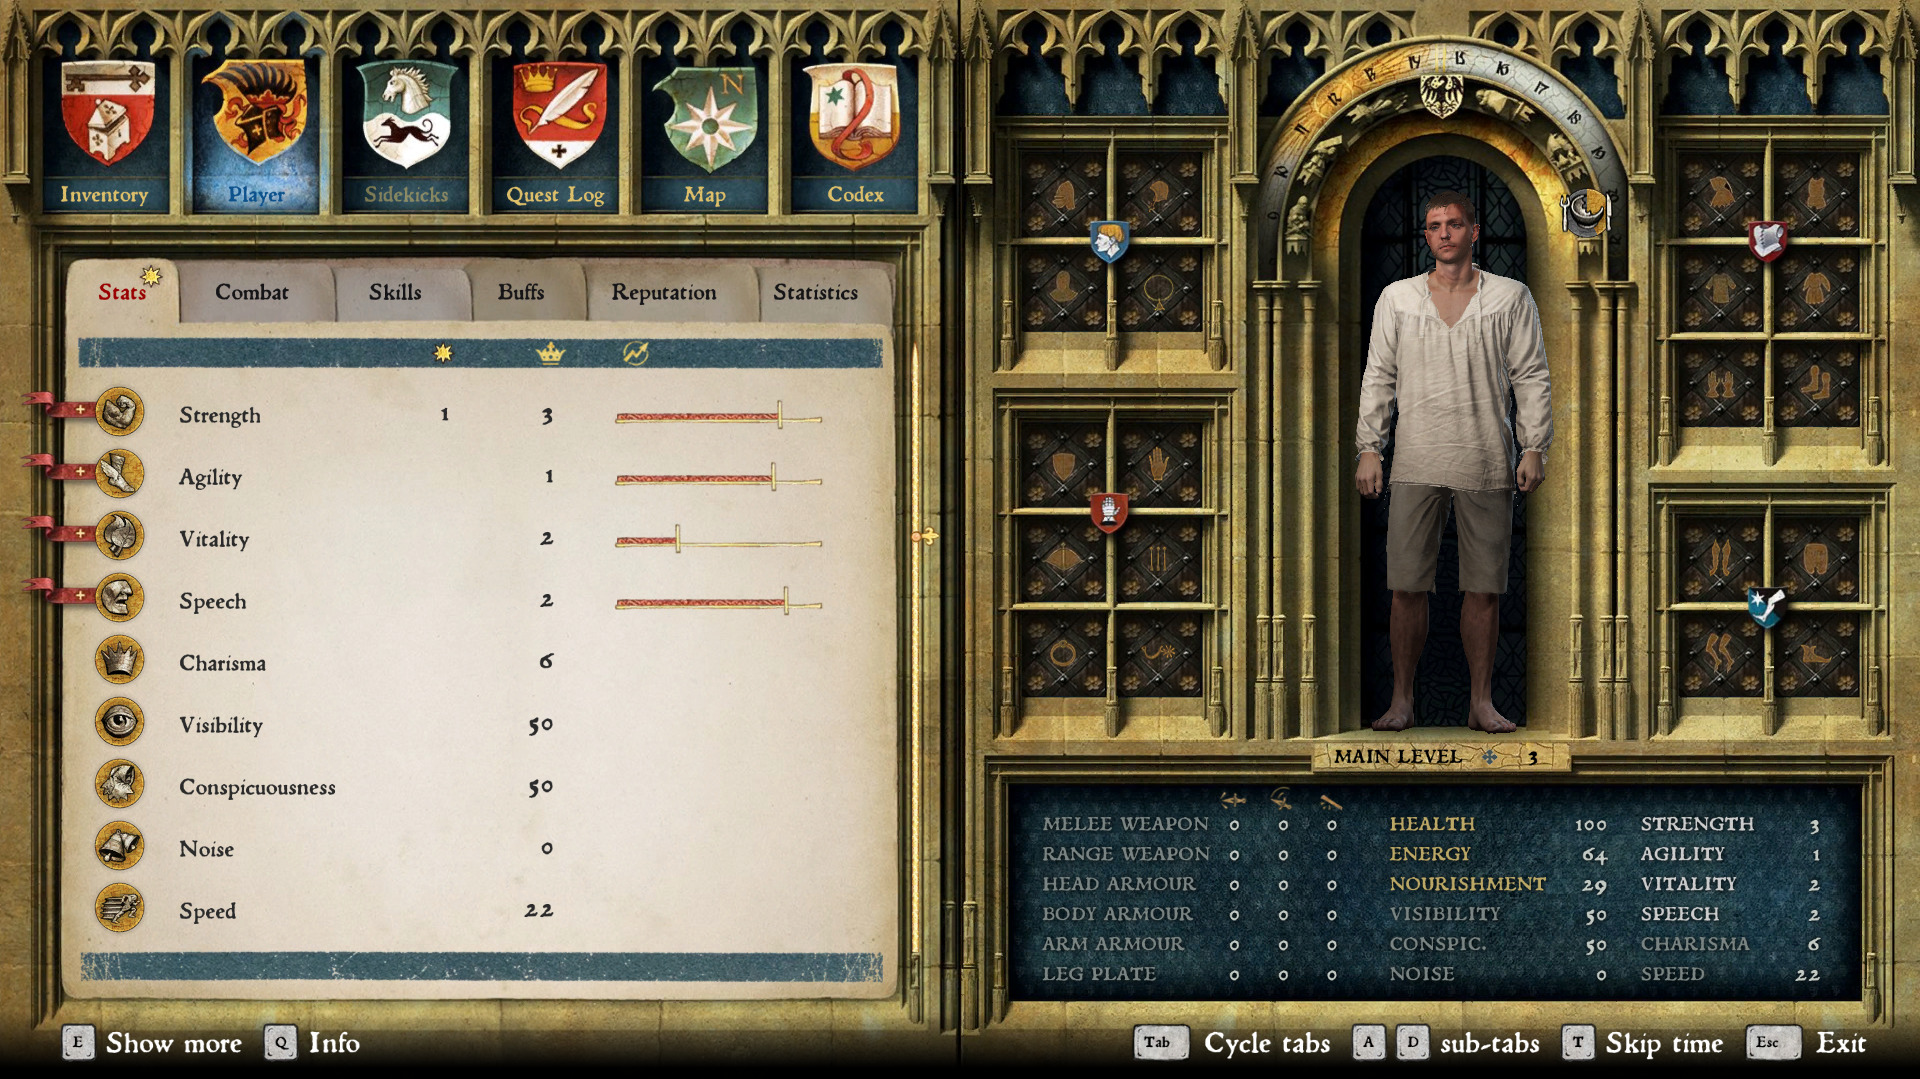 The character menu screen with stats visible